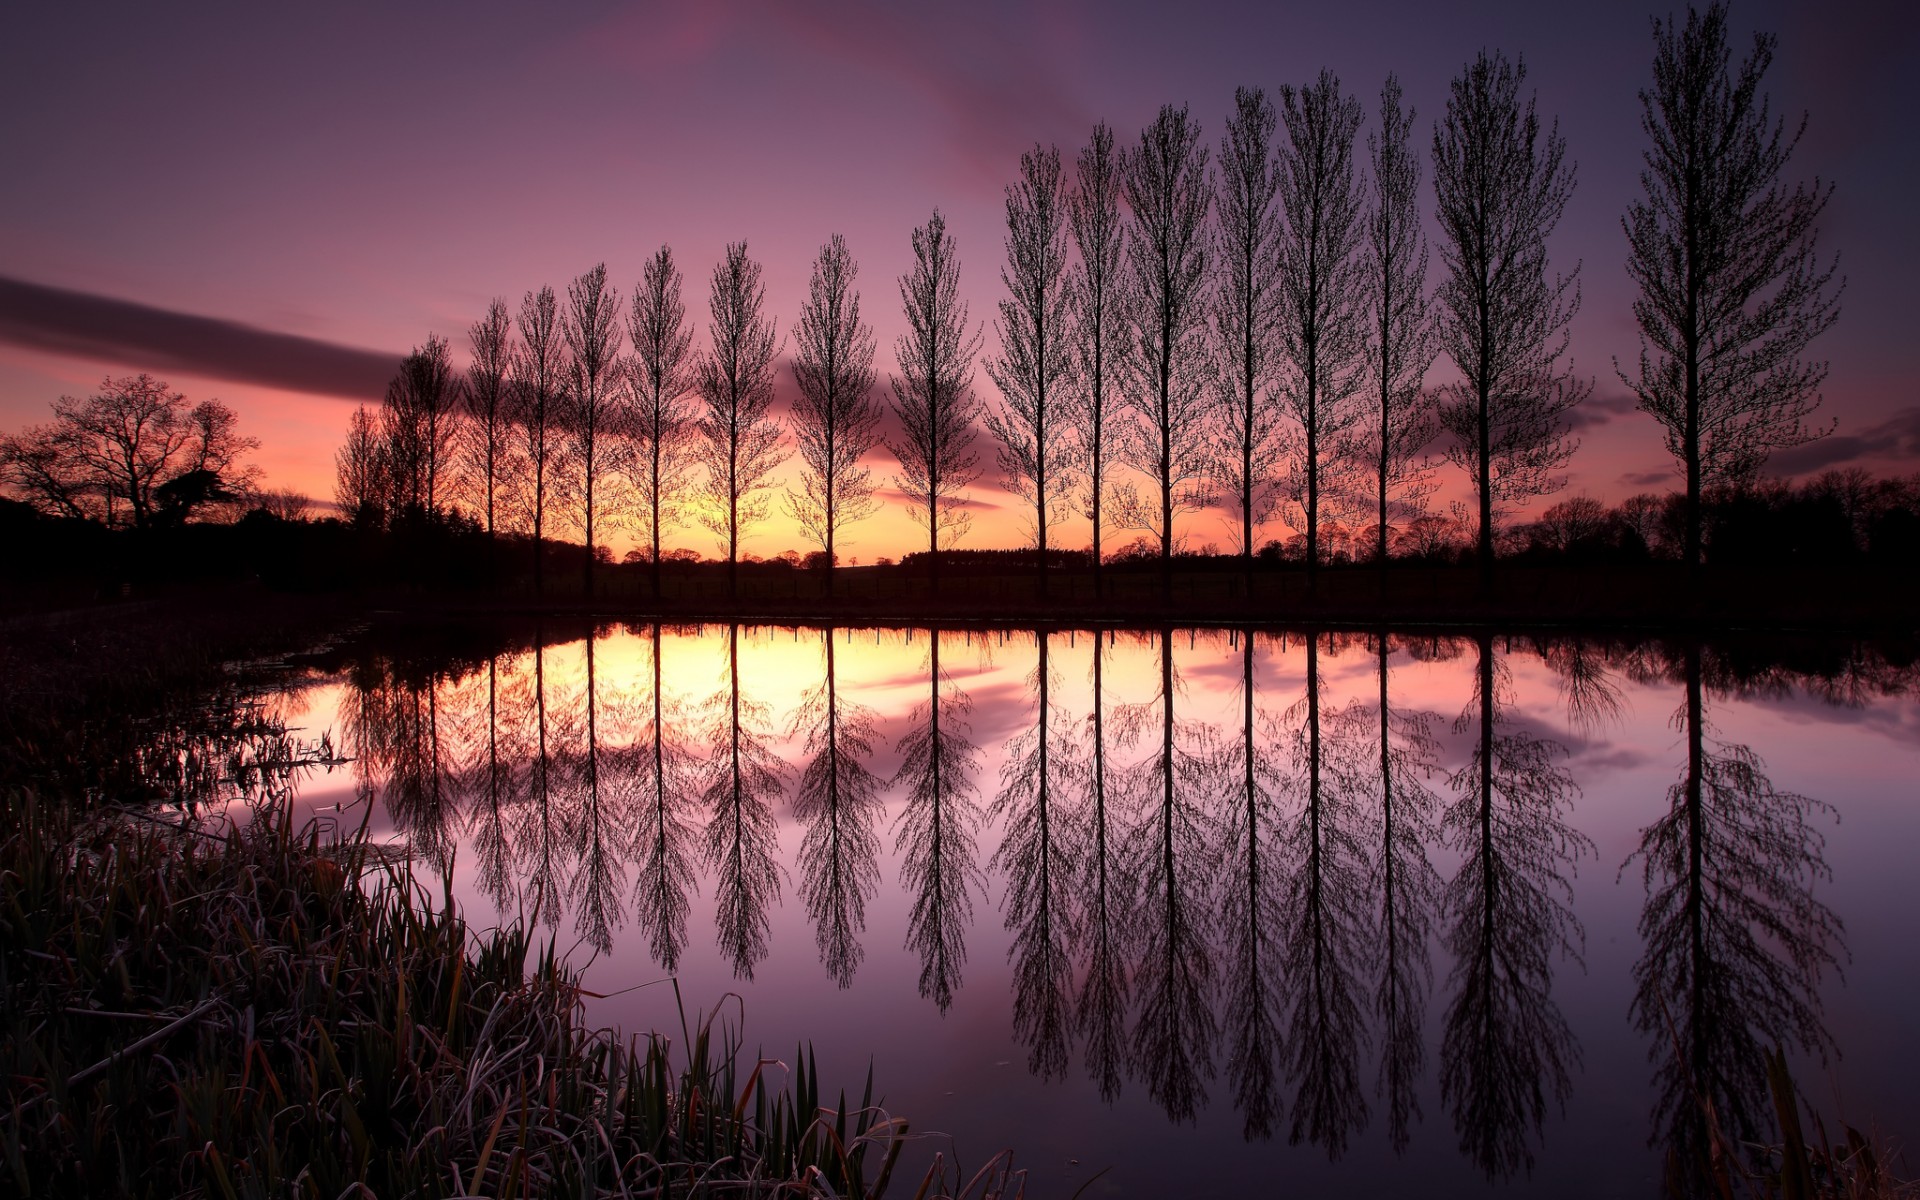 england, Trees, Row, Lake, Reflection, Night, Sunset, Sky, Clouds Wallpaper